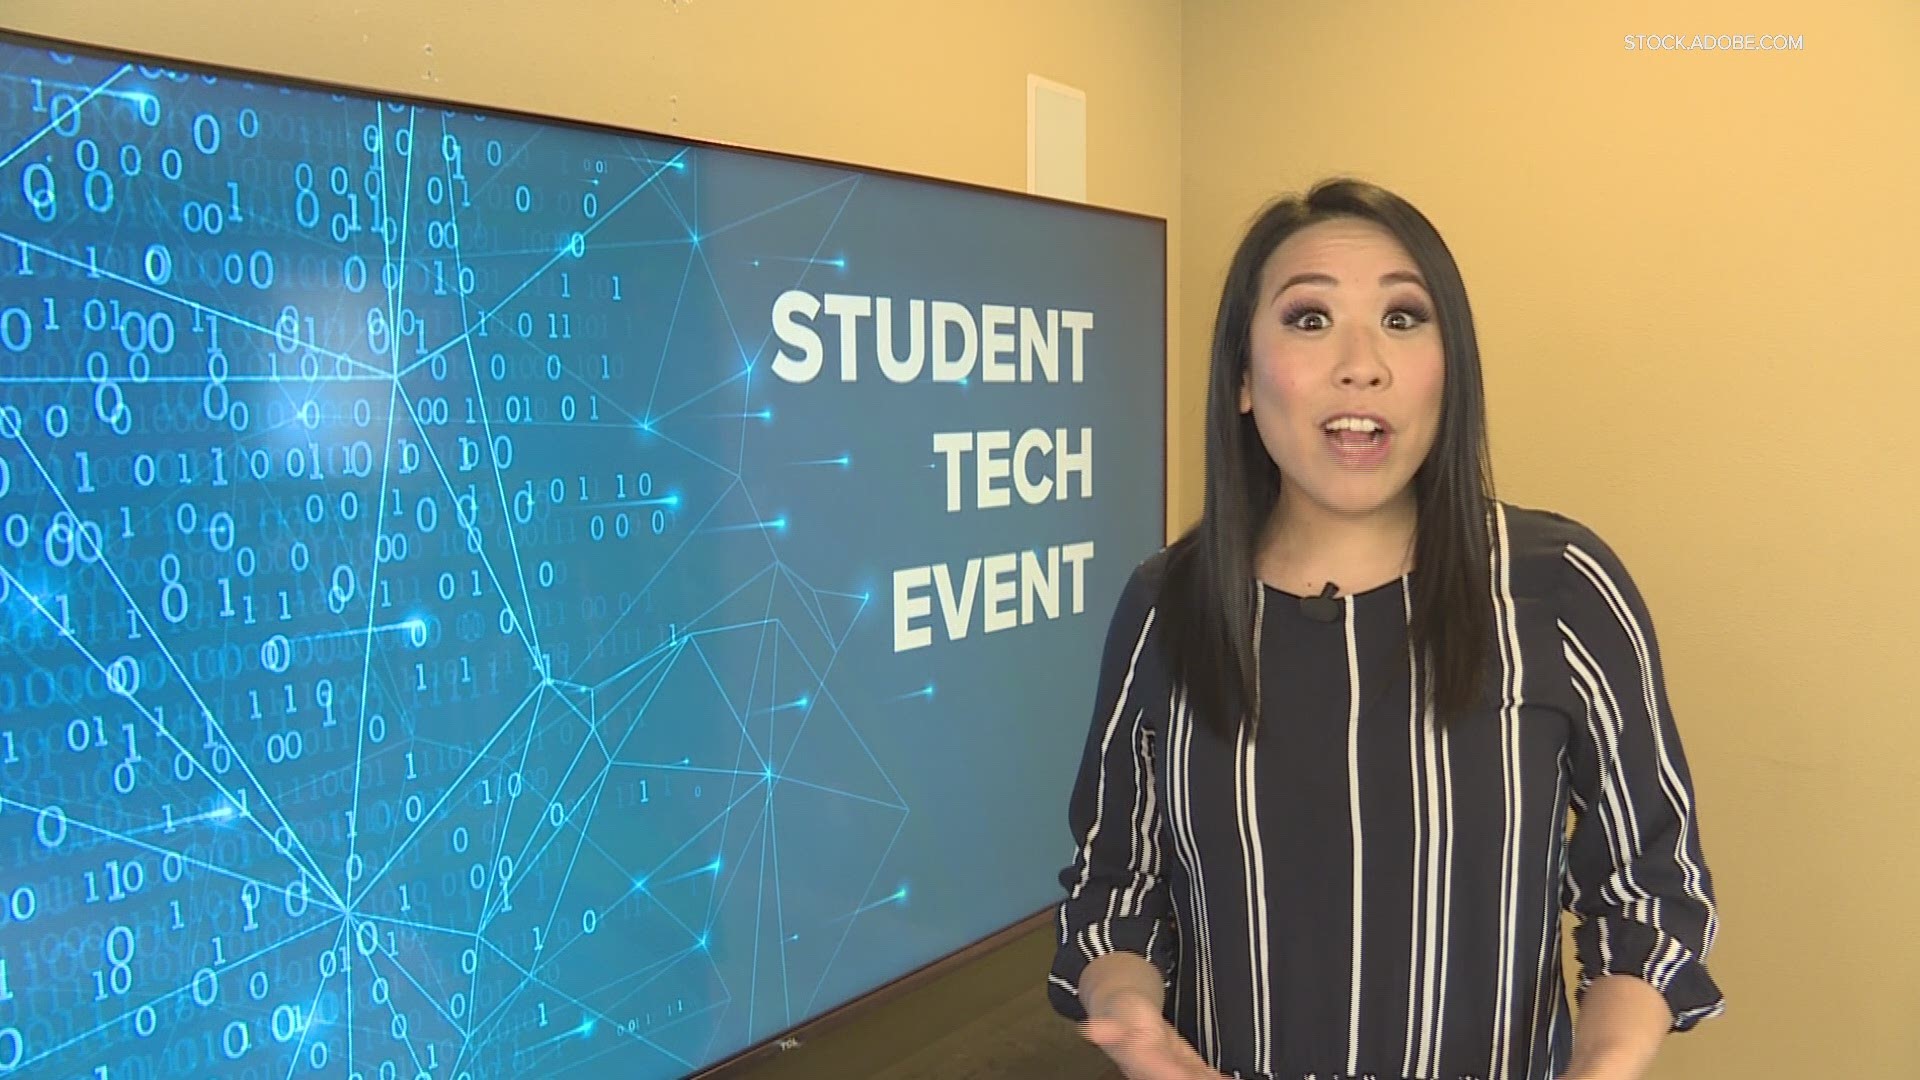 Here’s a fun opportunity for students interested in technology. Christine Pitawanich tells us about Hackathon.